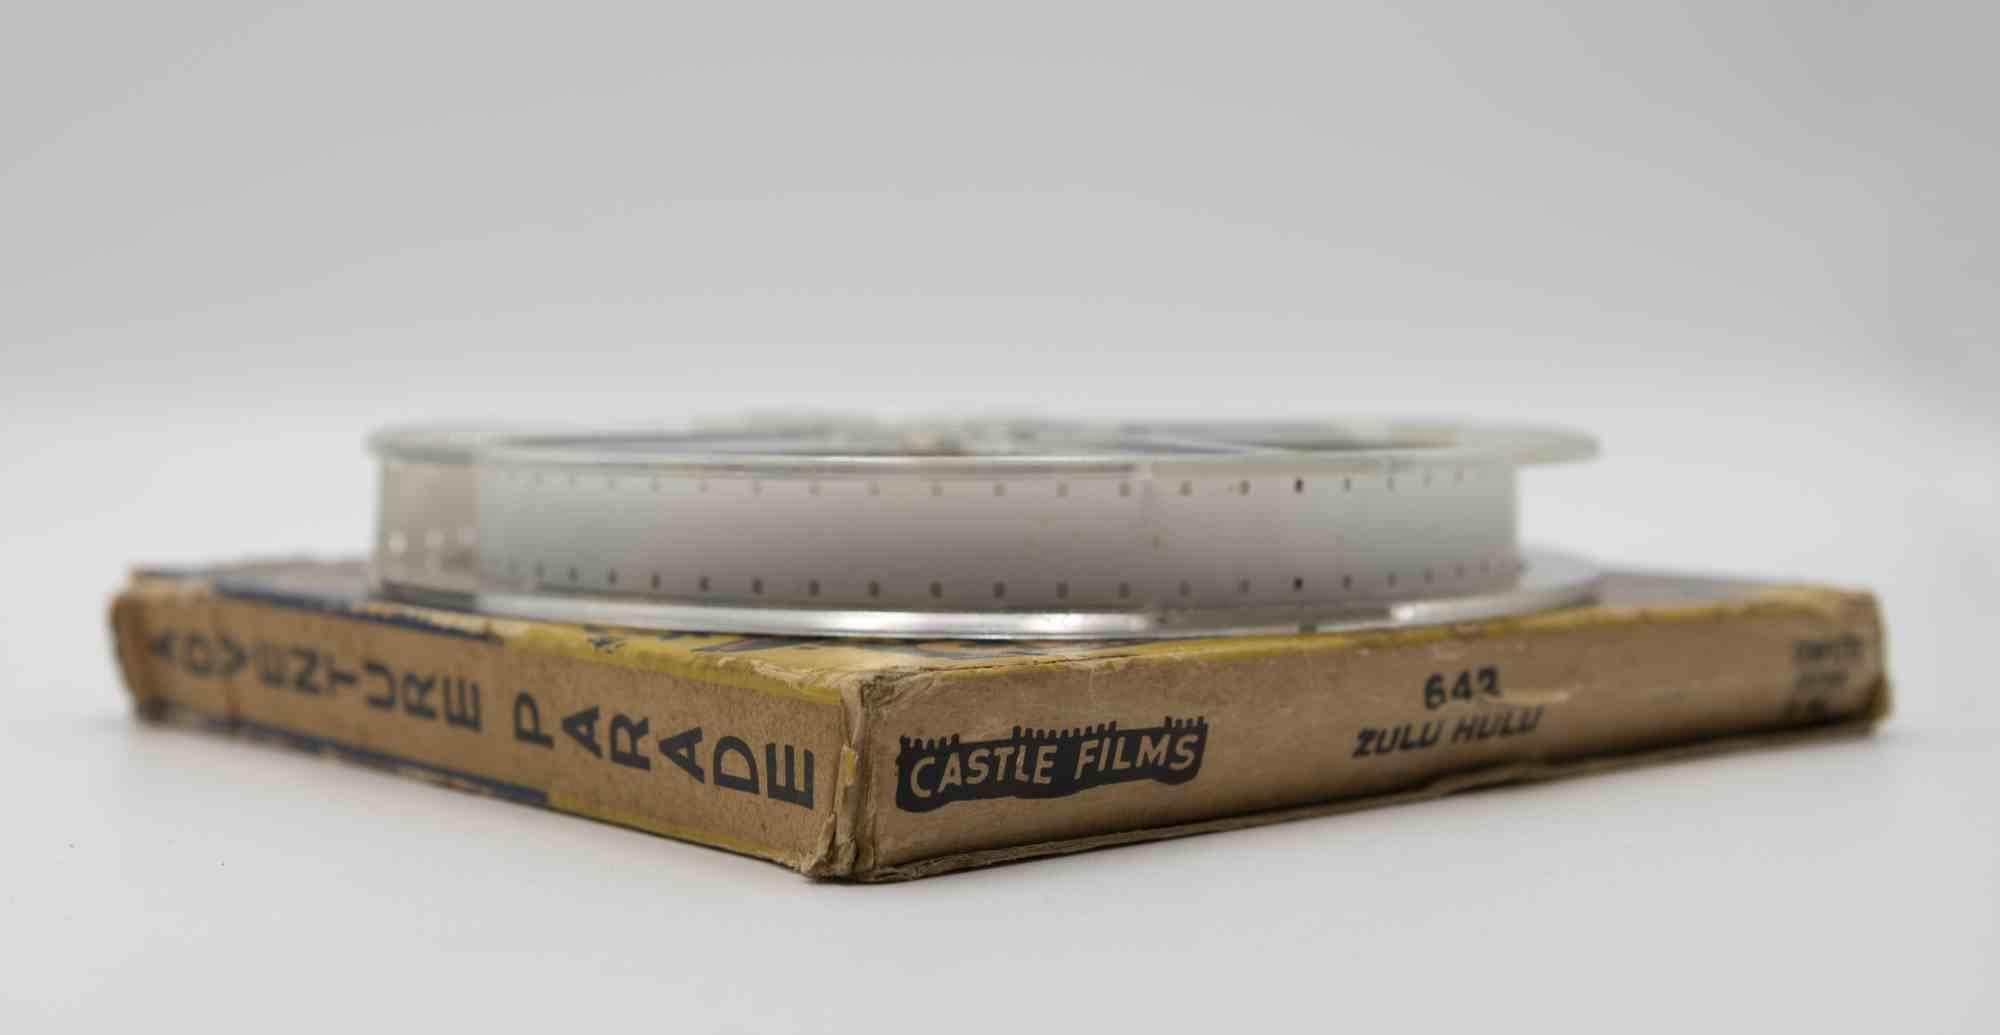 Adventure Parade is an original film from the 1950s.

Complete edition, Zulu Hulu. Castle films.

It includes original packaging.

16mm.

Good conditions